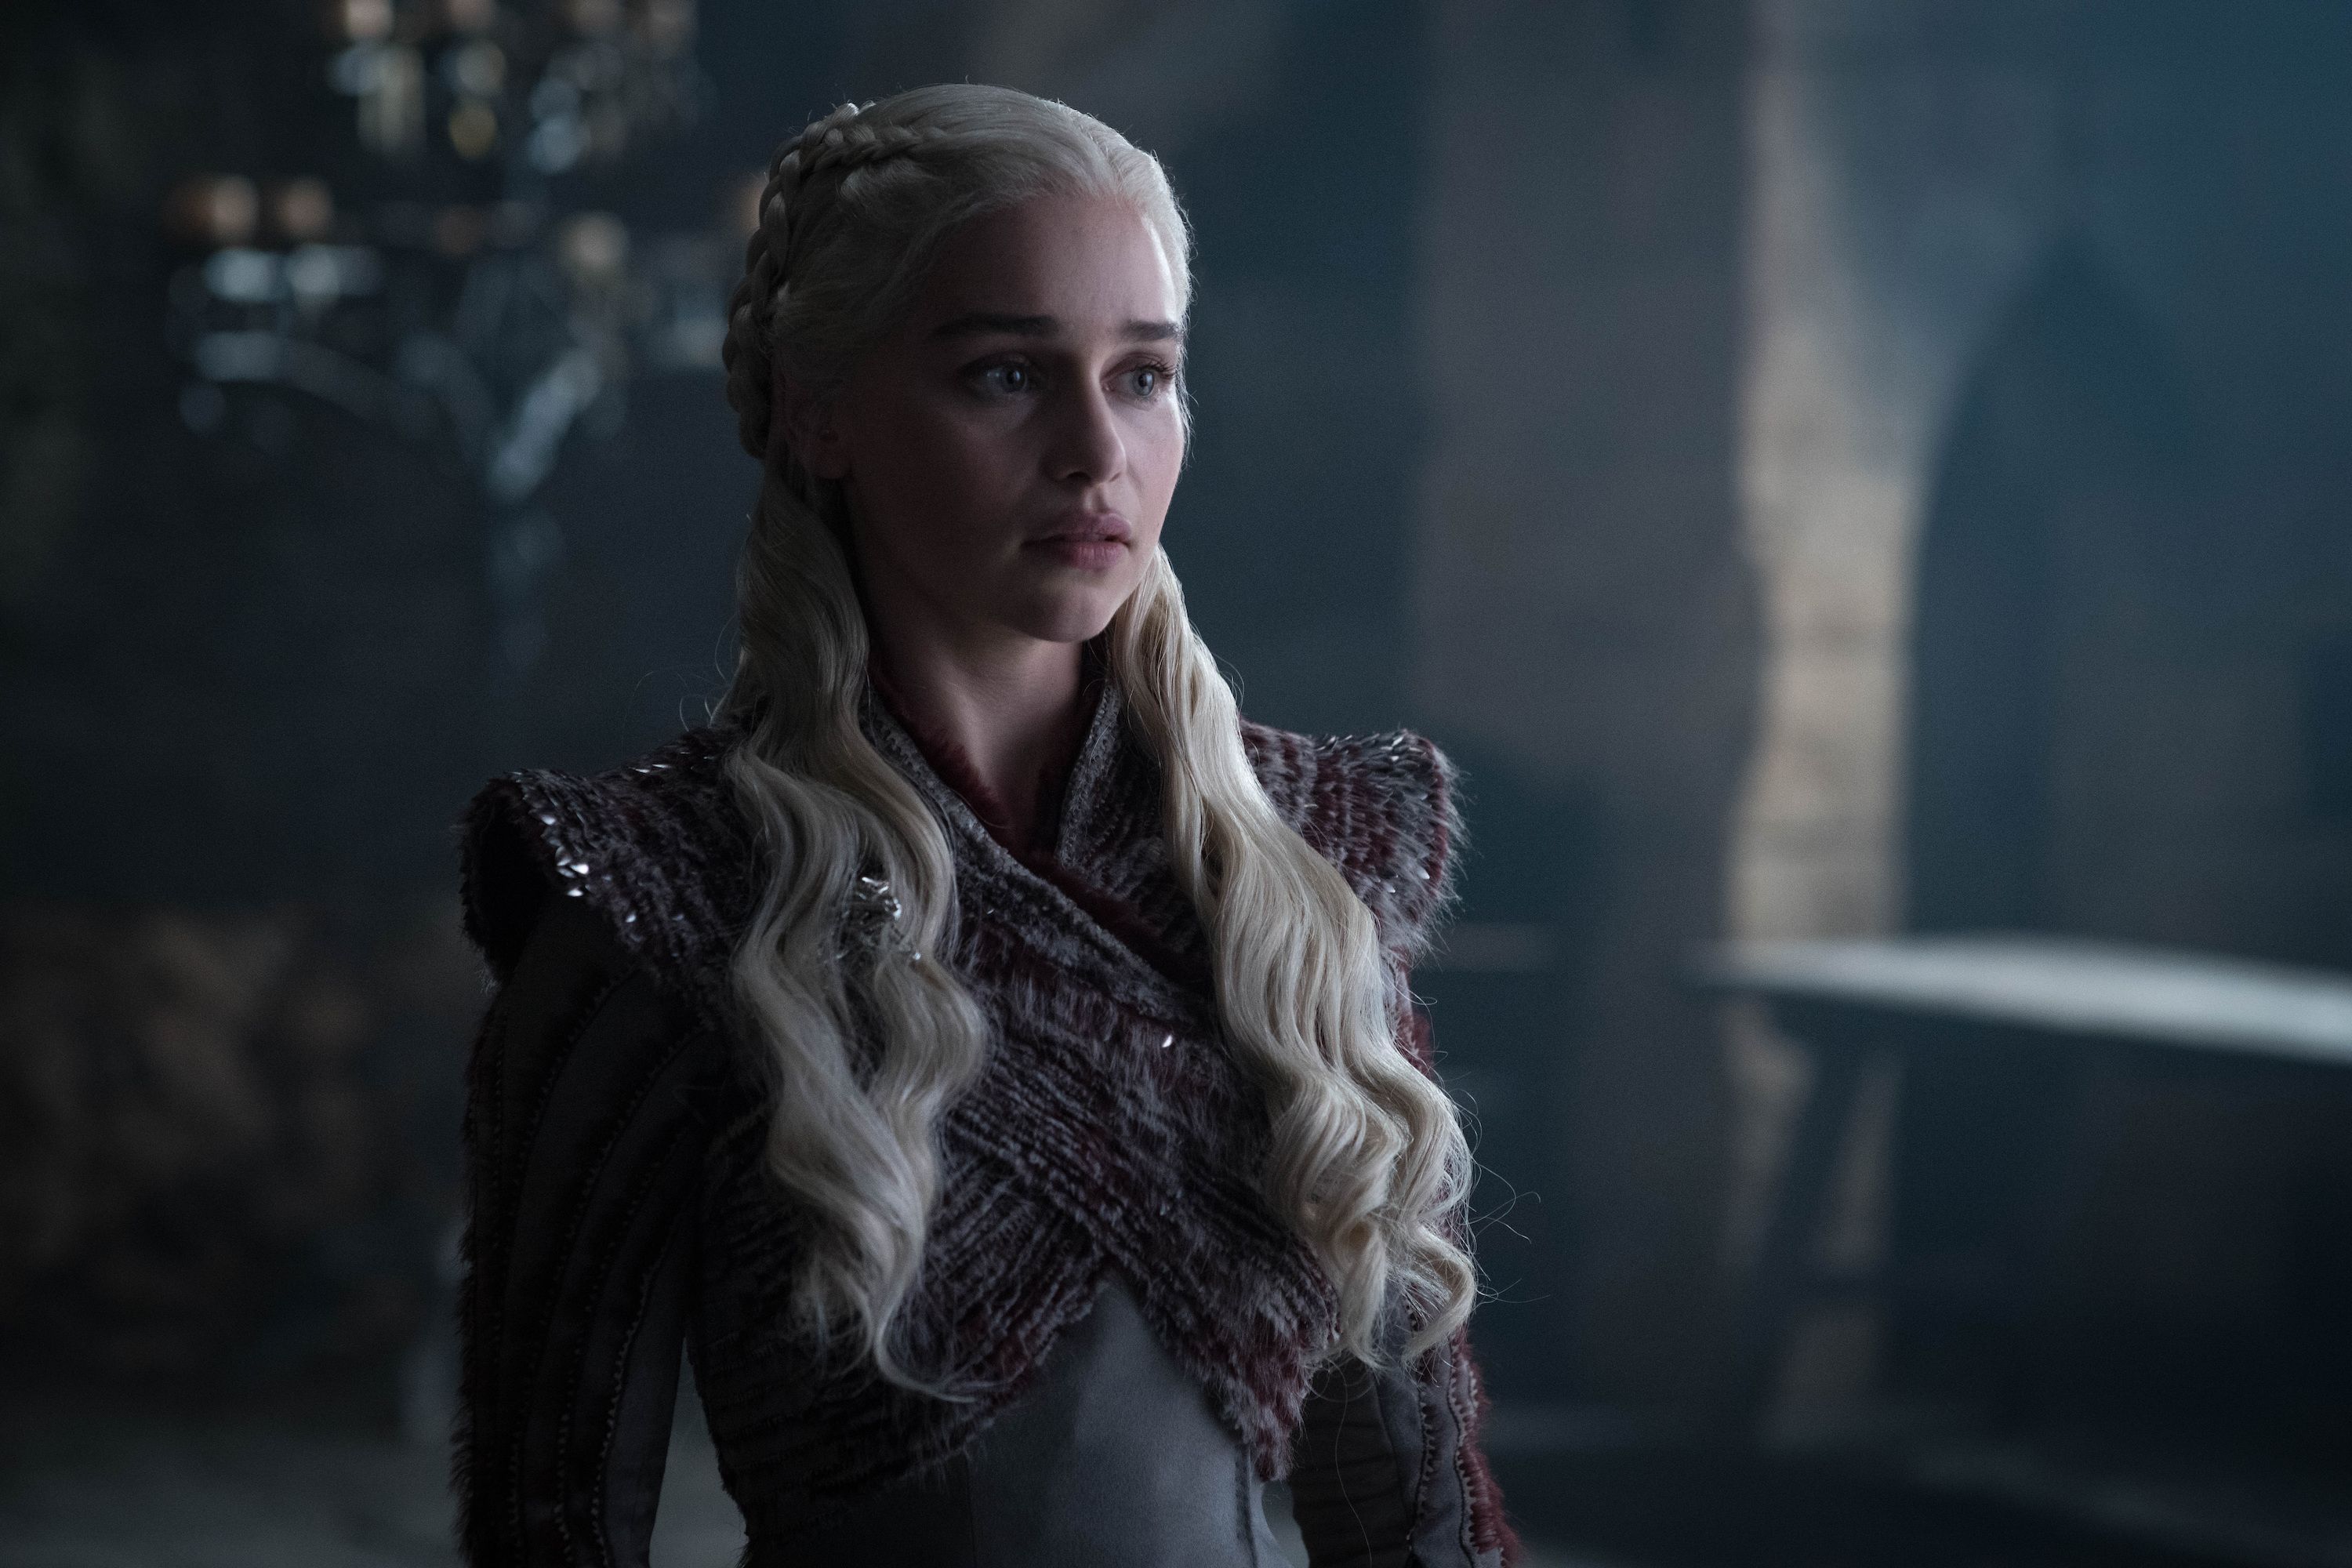 The Badass Women of Game of Thrones, Then and Now | Glamour